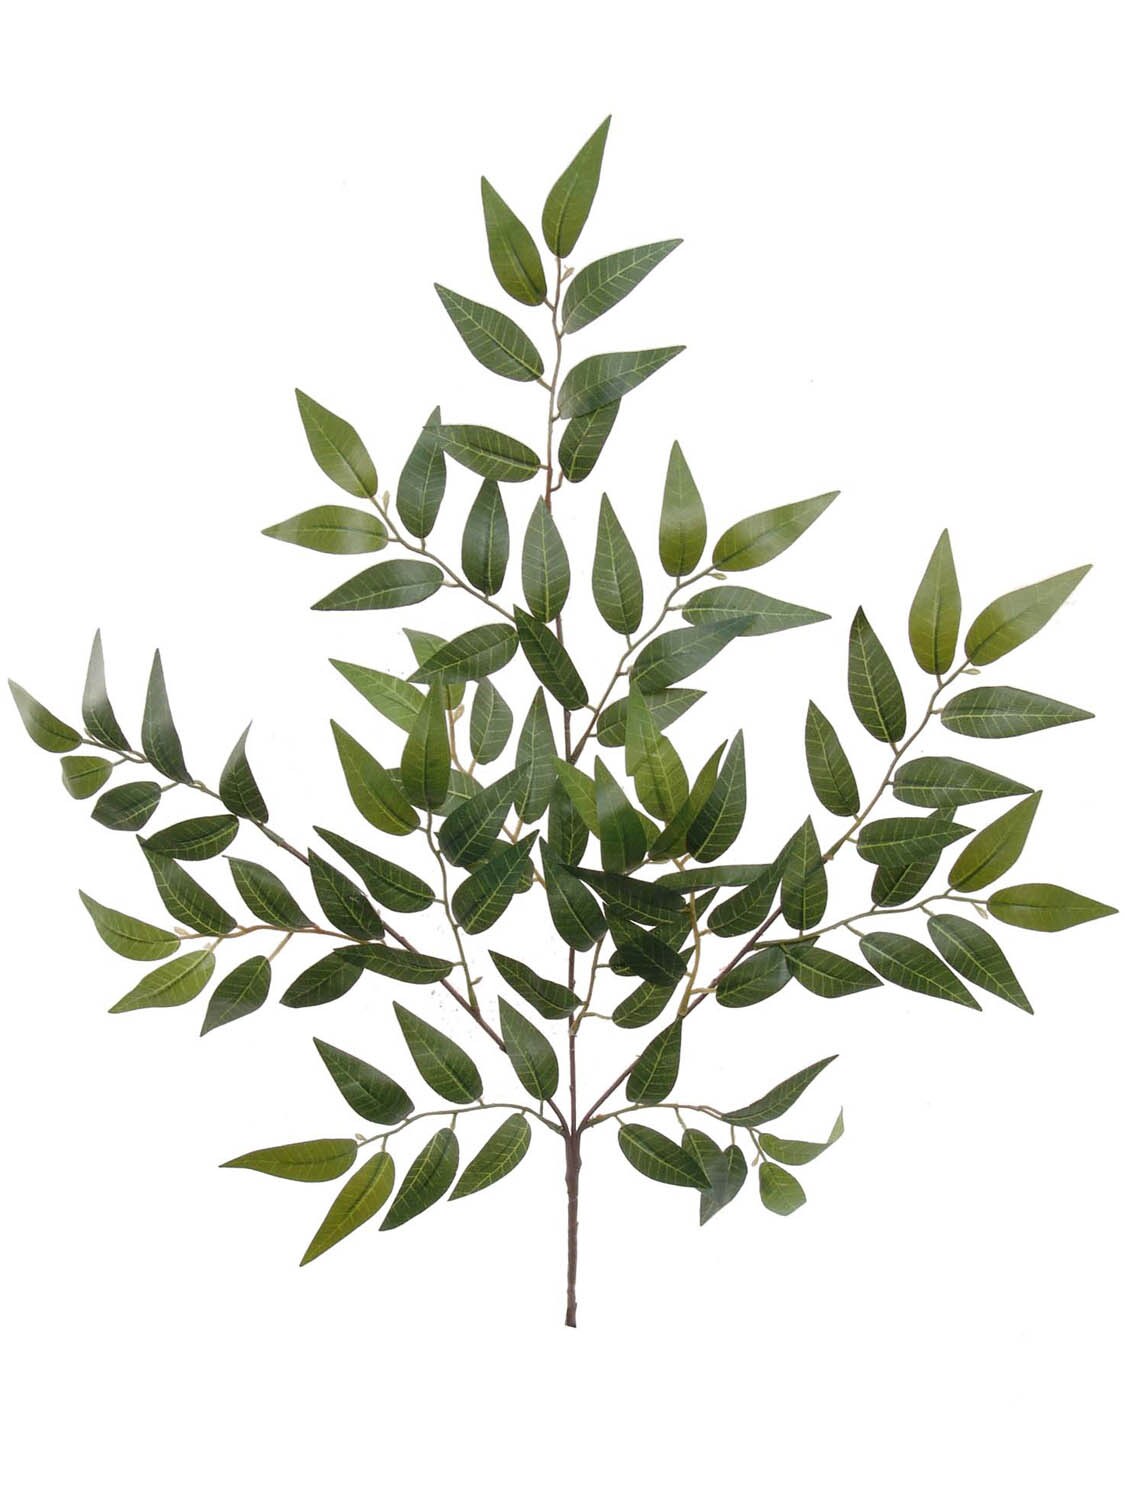 27&#x22; Lush Smilax Spray Set of 4 - 9 Leaves per Stem - Lifelike Artificial Greenery - Ideal for Home D&#xE9;cor, Event Decorations, and Floral Arrangements